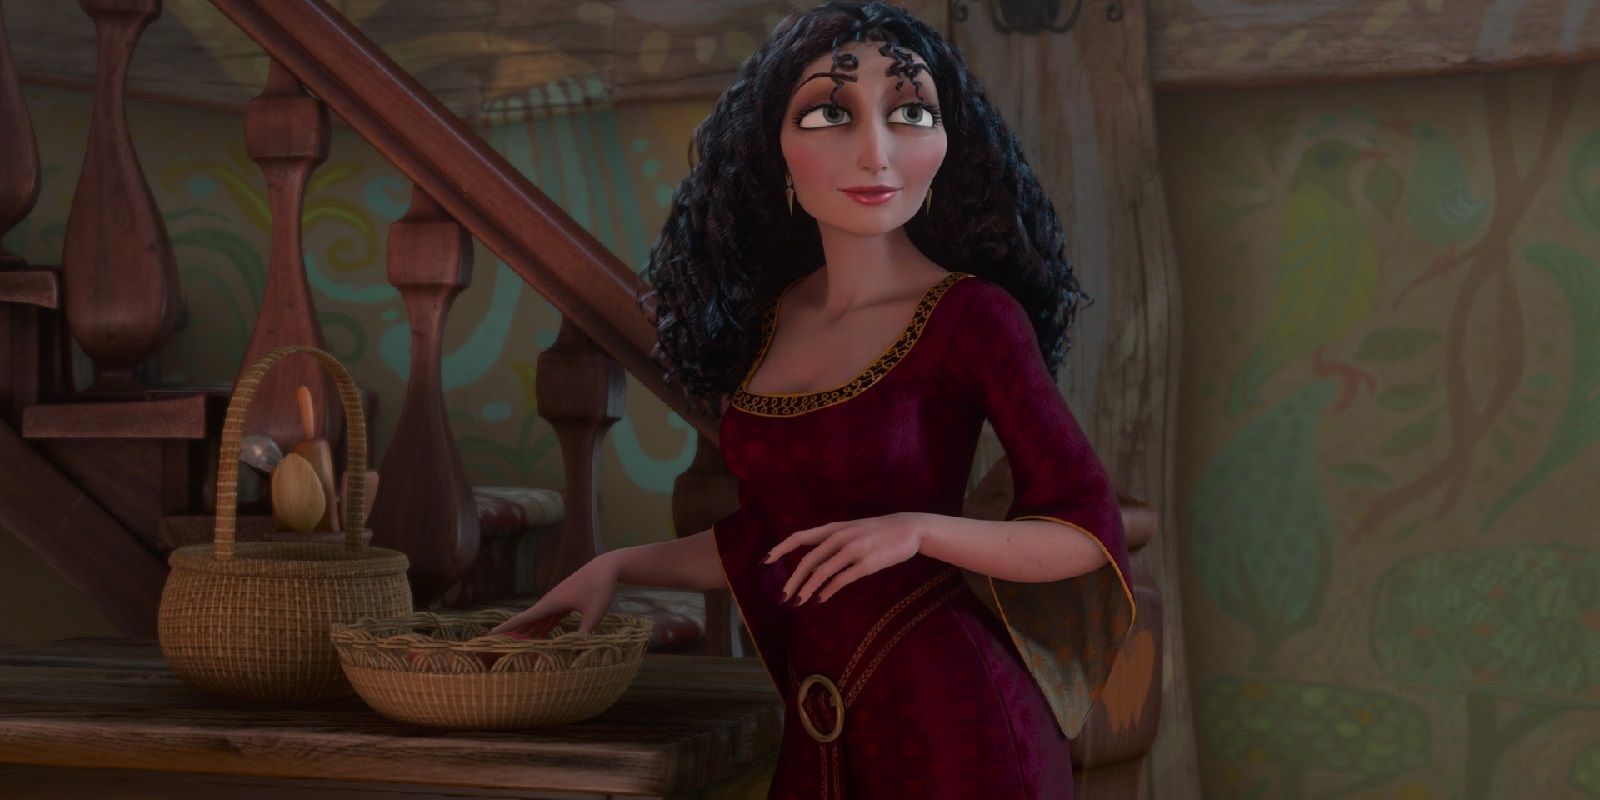 Mother Gothel stands on the stairs in Tangled